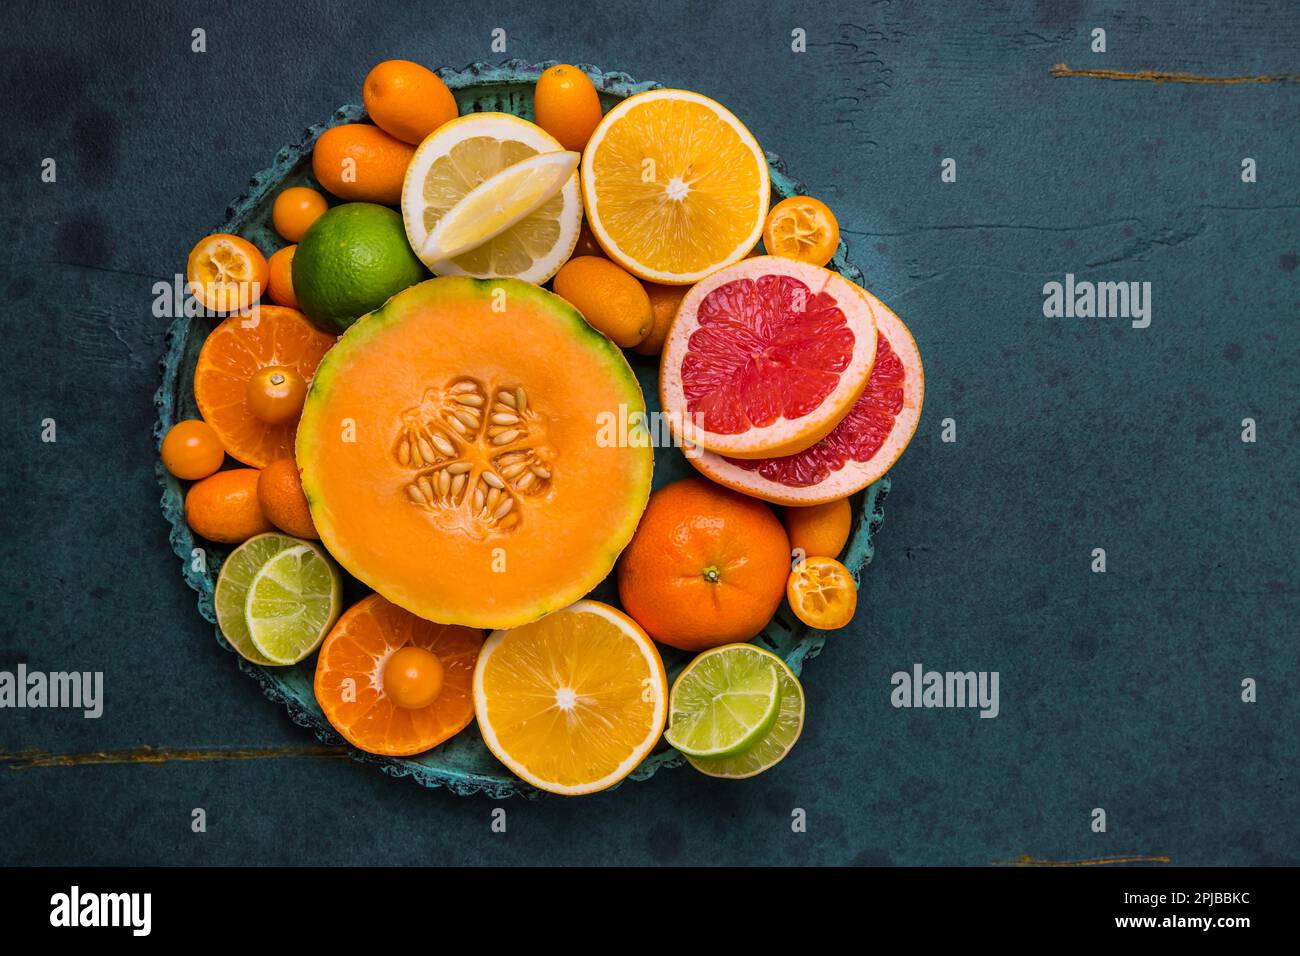 Flat lay layout of fruit citrus and other summer fruits on green background. Healthy eating concept Stock Photo